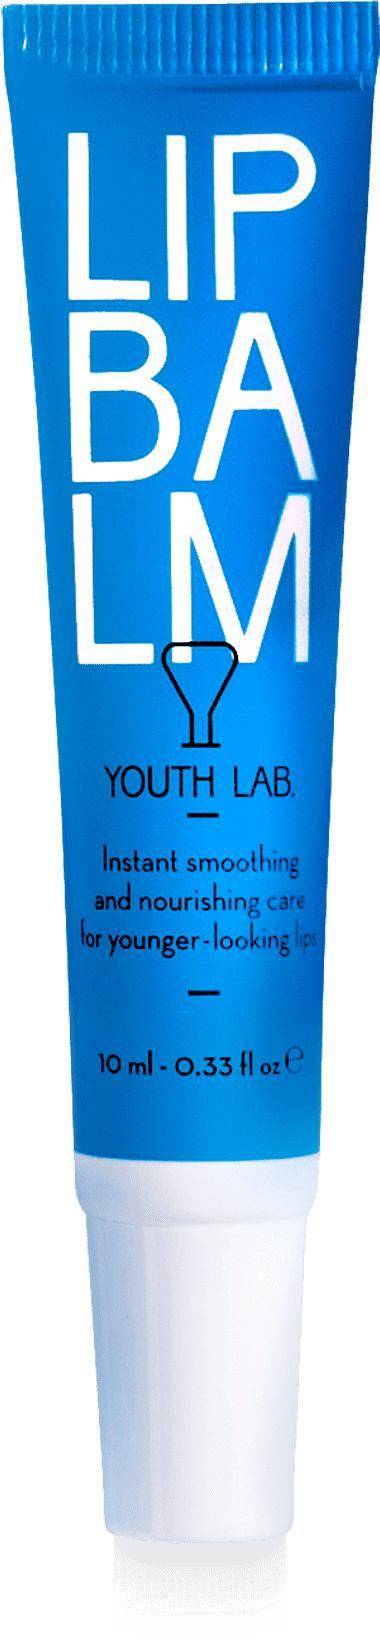 Youth Lab lip balm for all skin types pn: